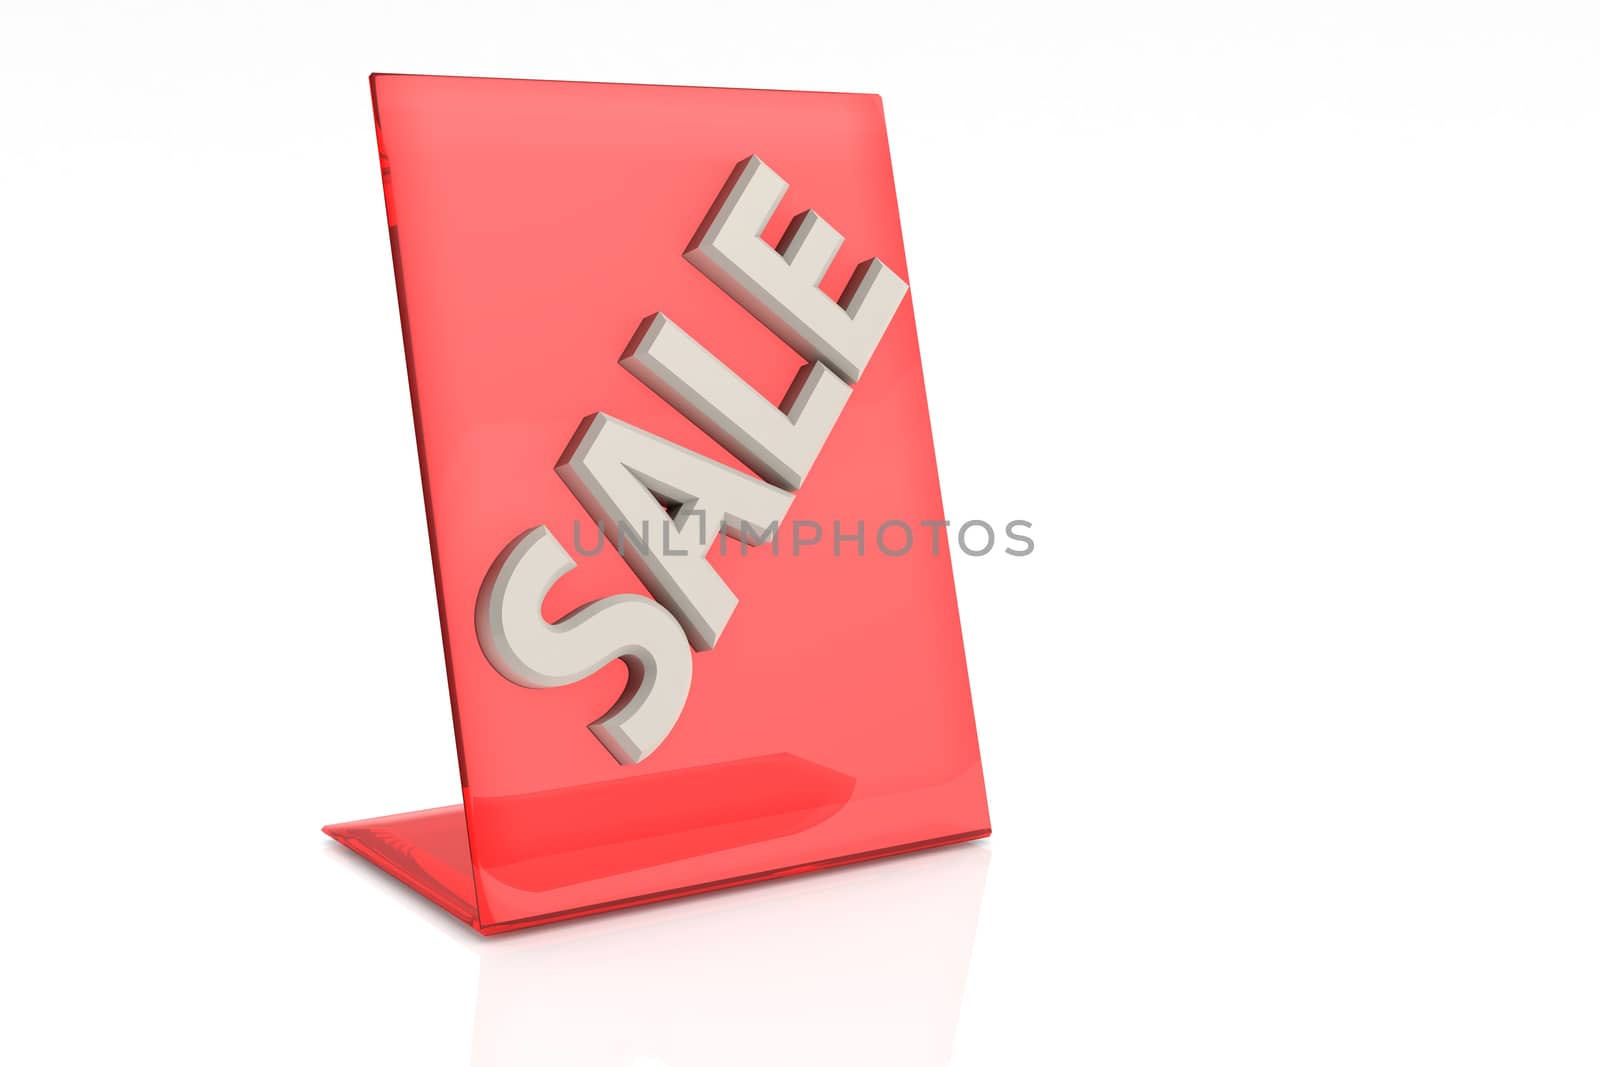 hot sale sign isolated on white background